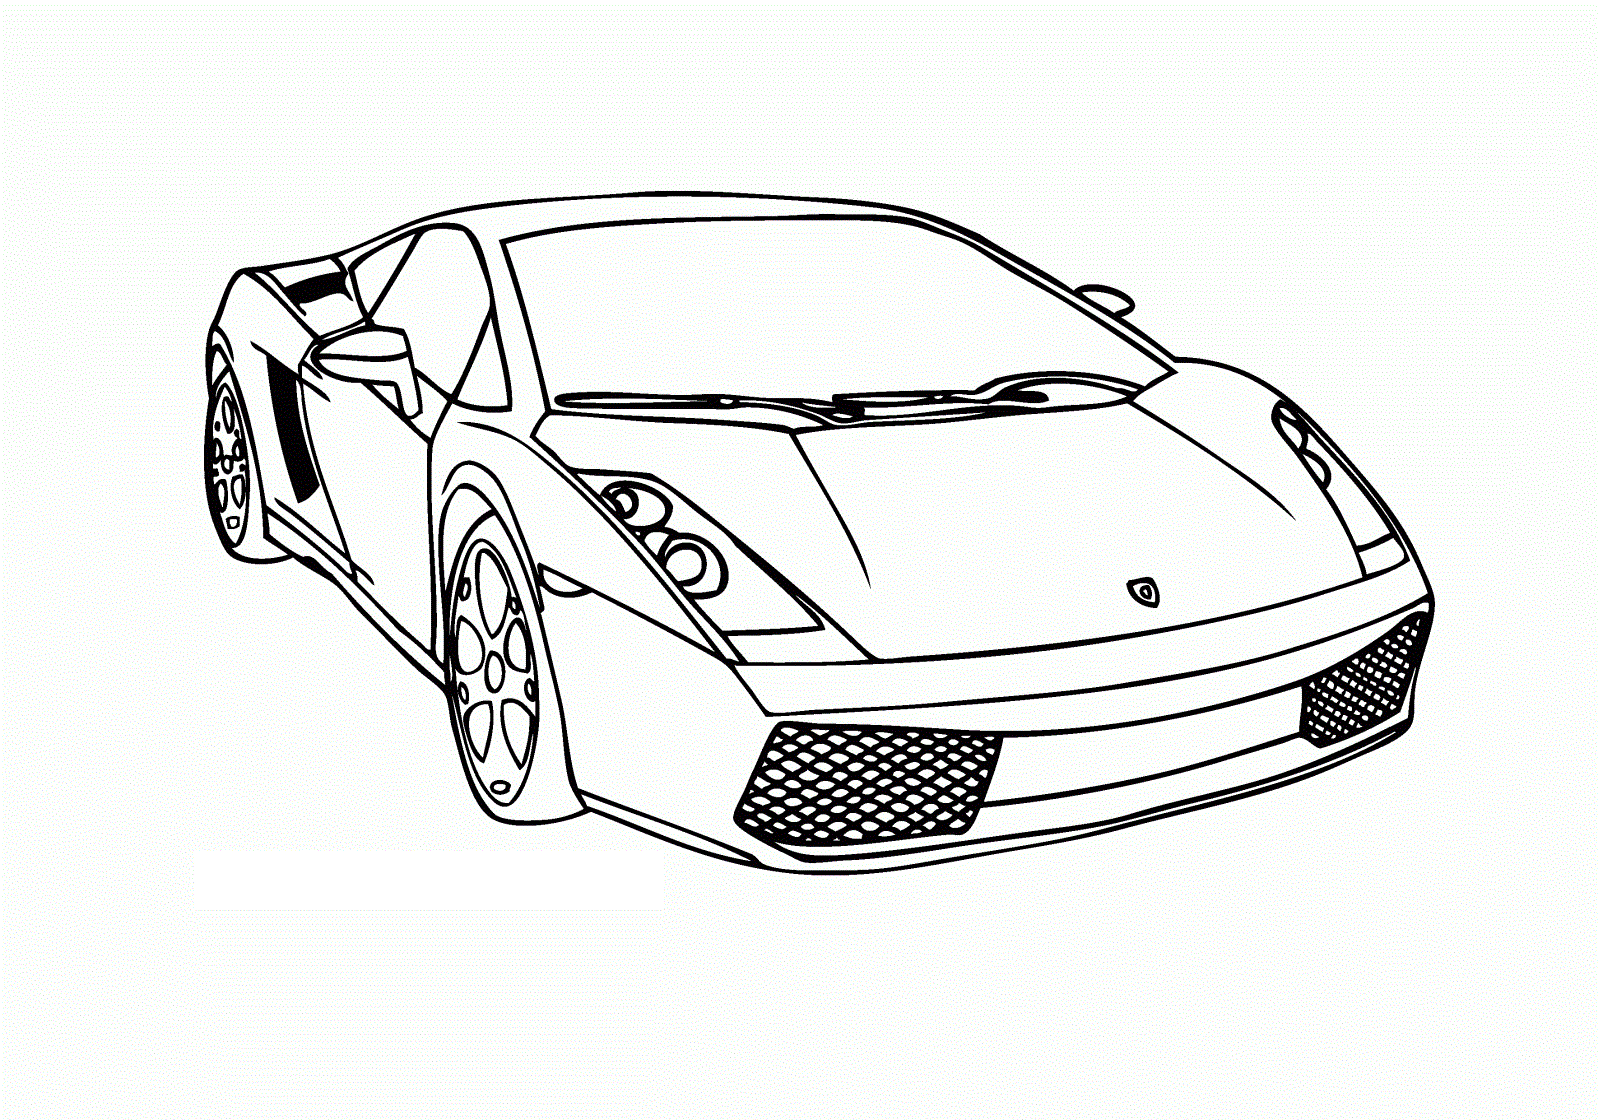  Cars   Coloring Pages 7